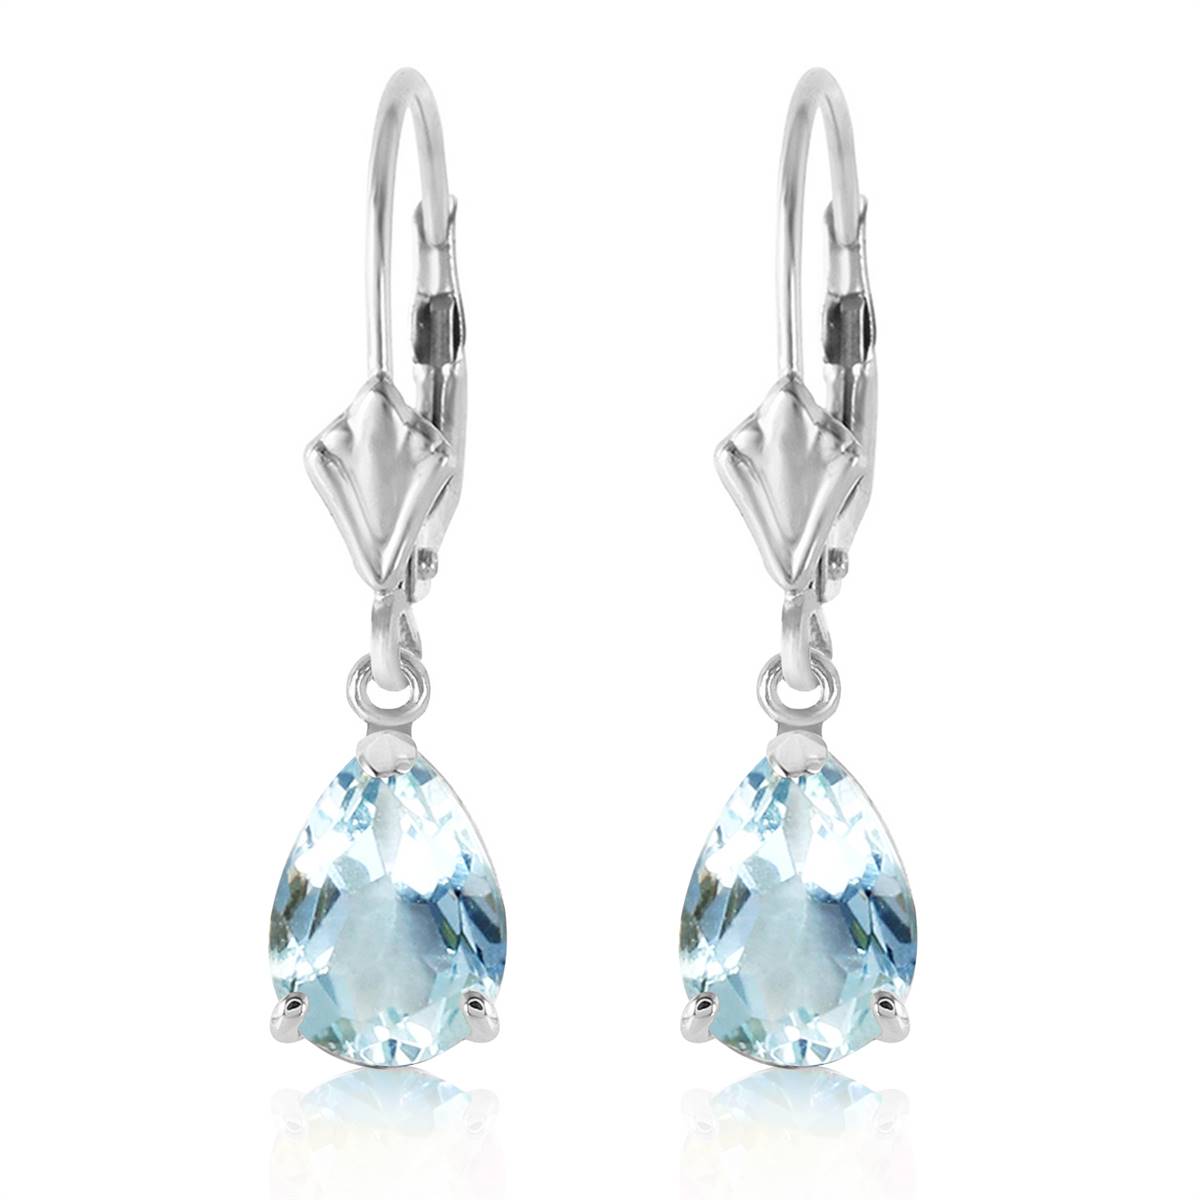 2.85 Carat 14K Solid White Gold Applying Your Hand Aquamarine Earrings